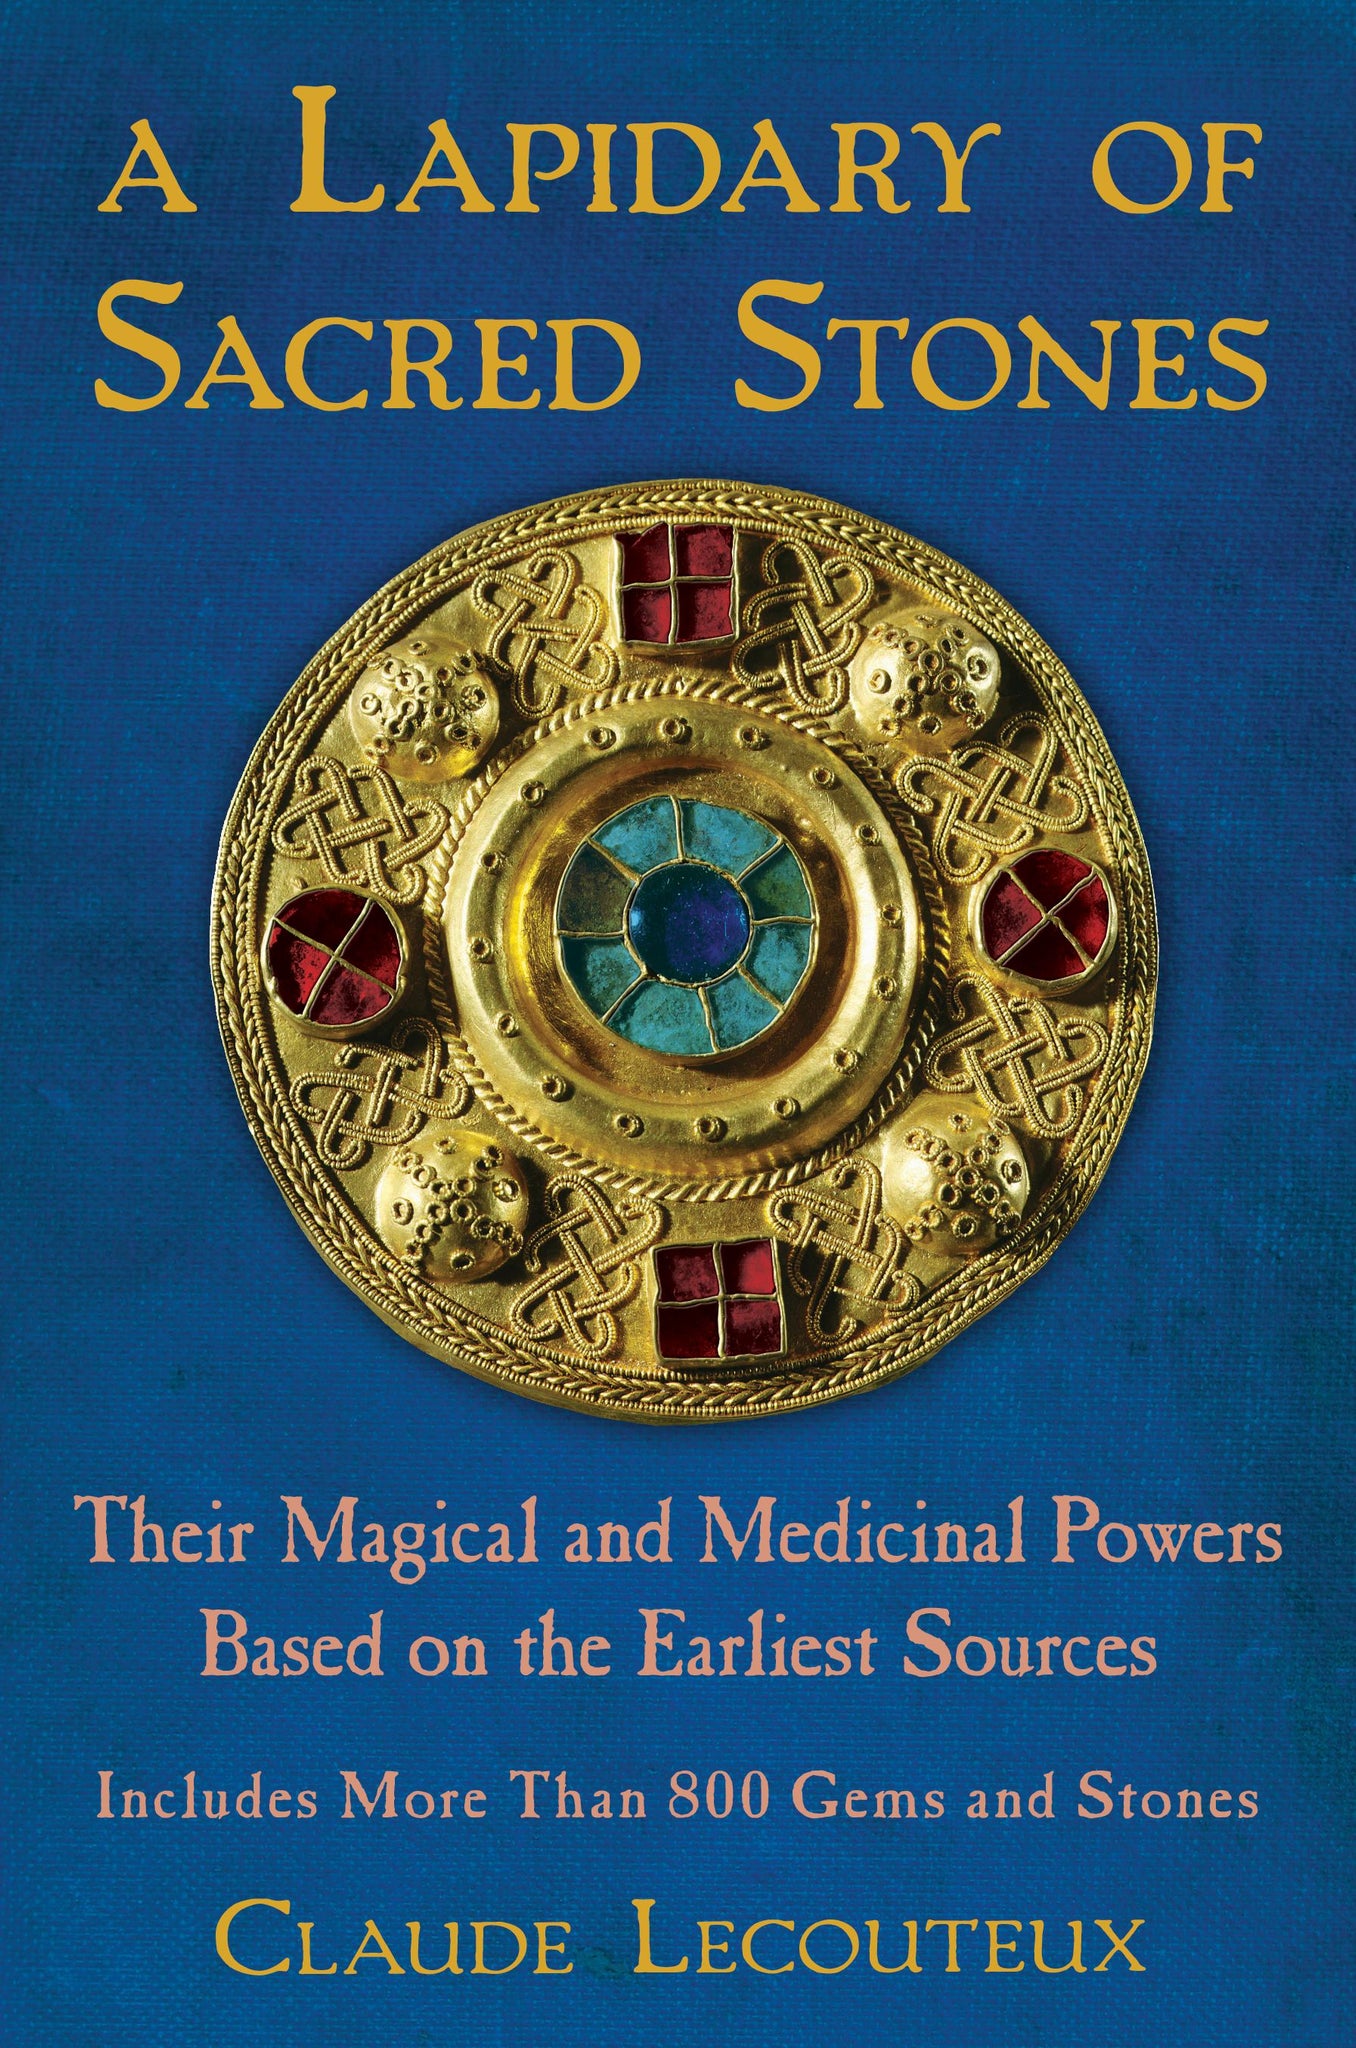 A Lapidary of Sacred Stones : Their Magical and Medicinal Powers Based on the Earliest Sources